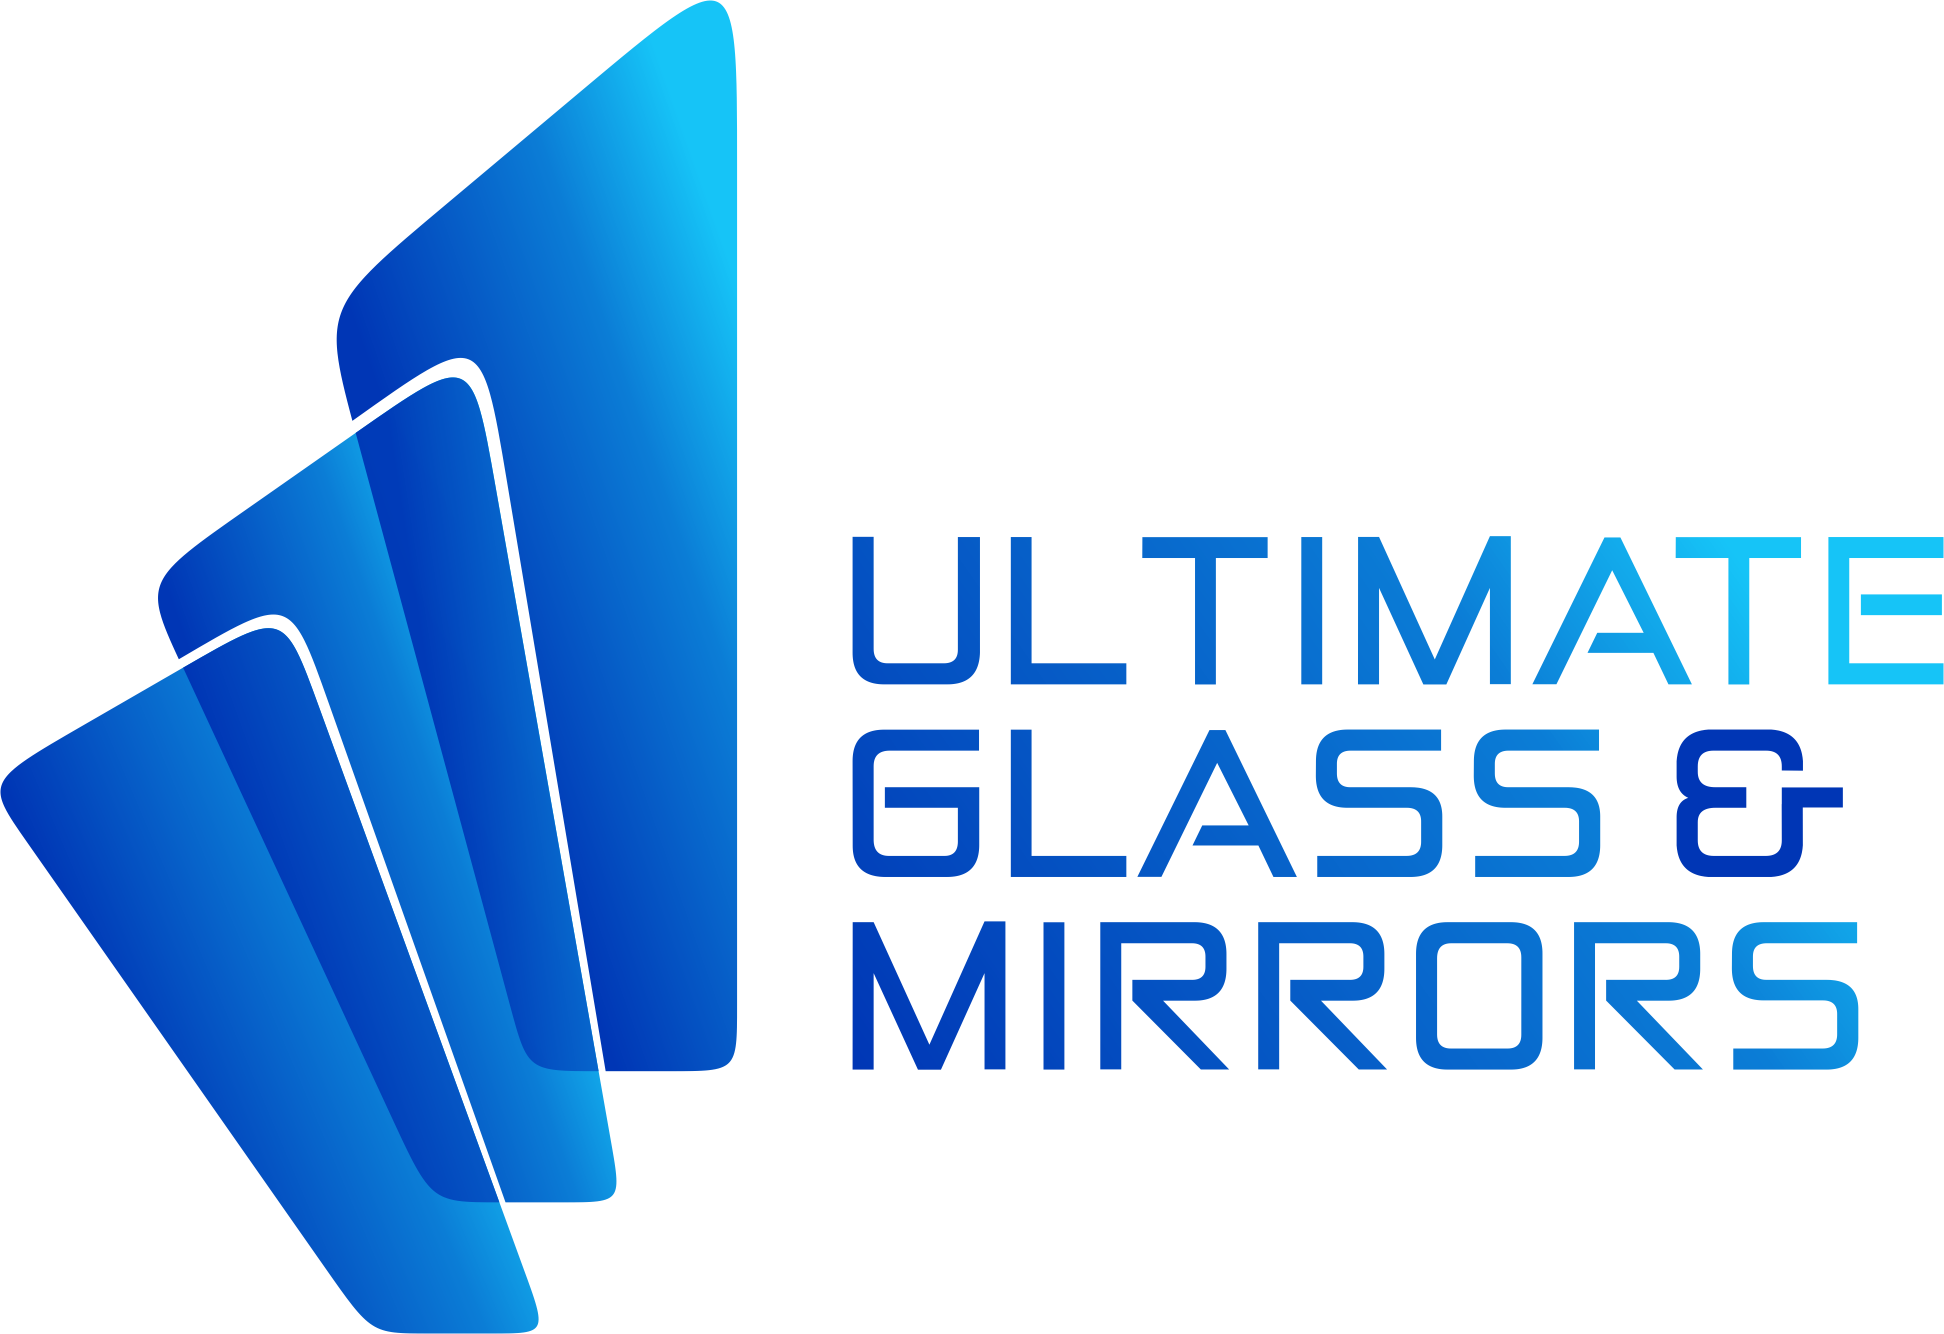 Ultimate Glass & Mirrors